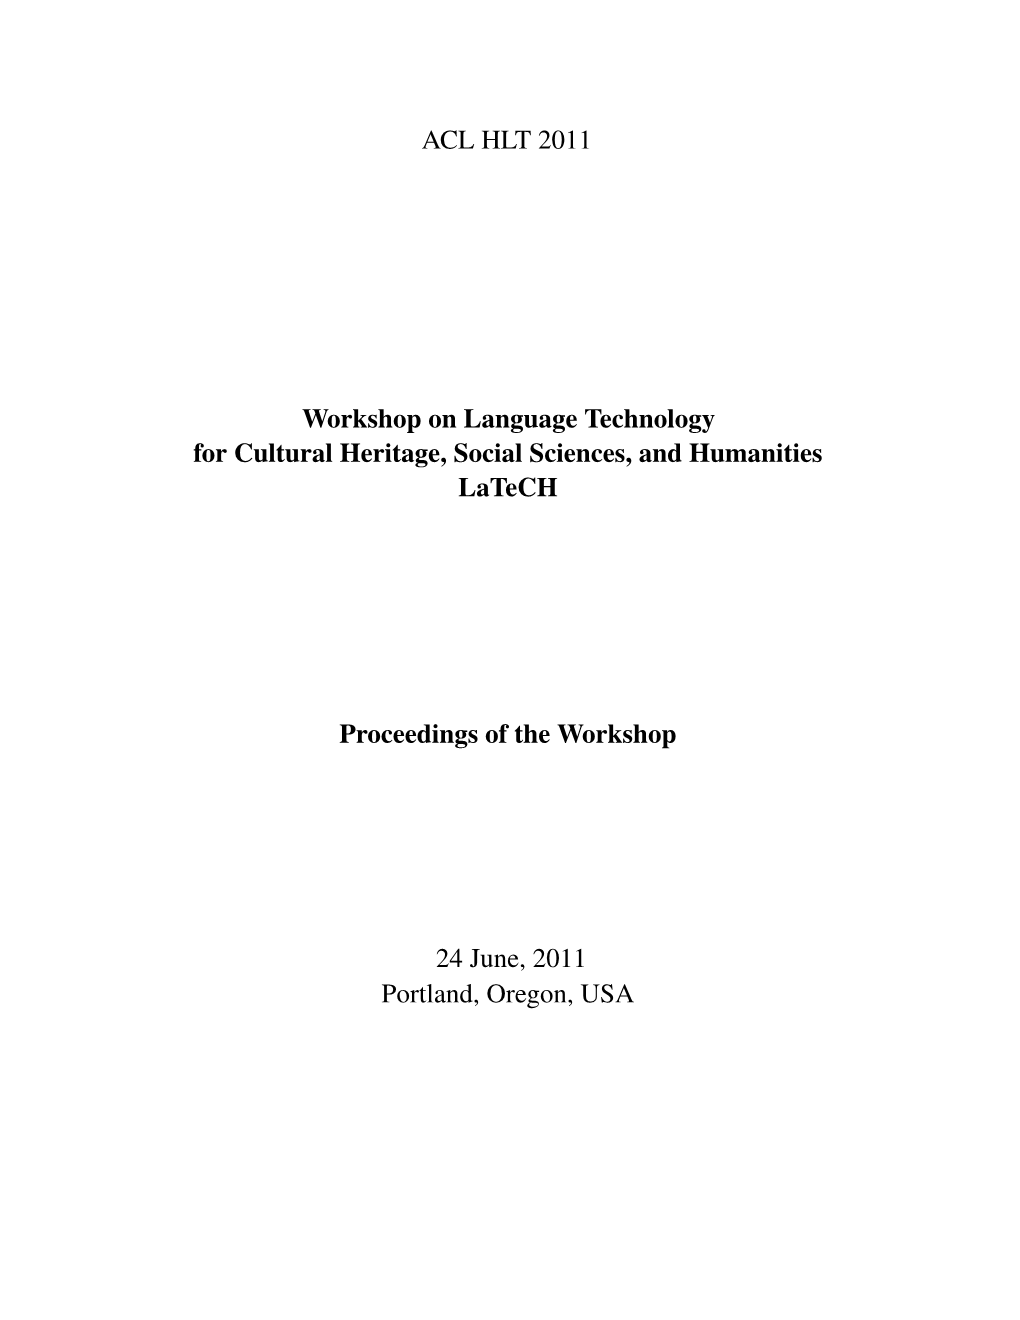 Proceedings of the 5Th ACL-HLT Workshop on Language Technology for Cultural Heritage, Social Sciences, and Humanities, Pages 1–9, Portland, OR, USA, 24 June 2011